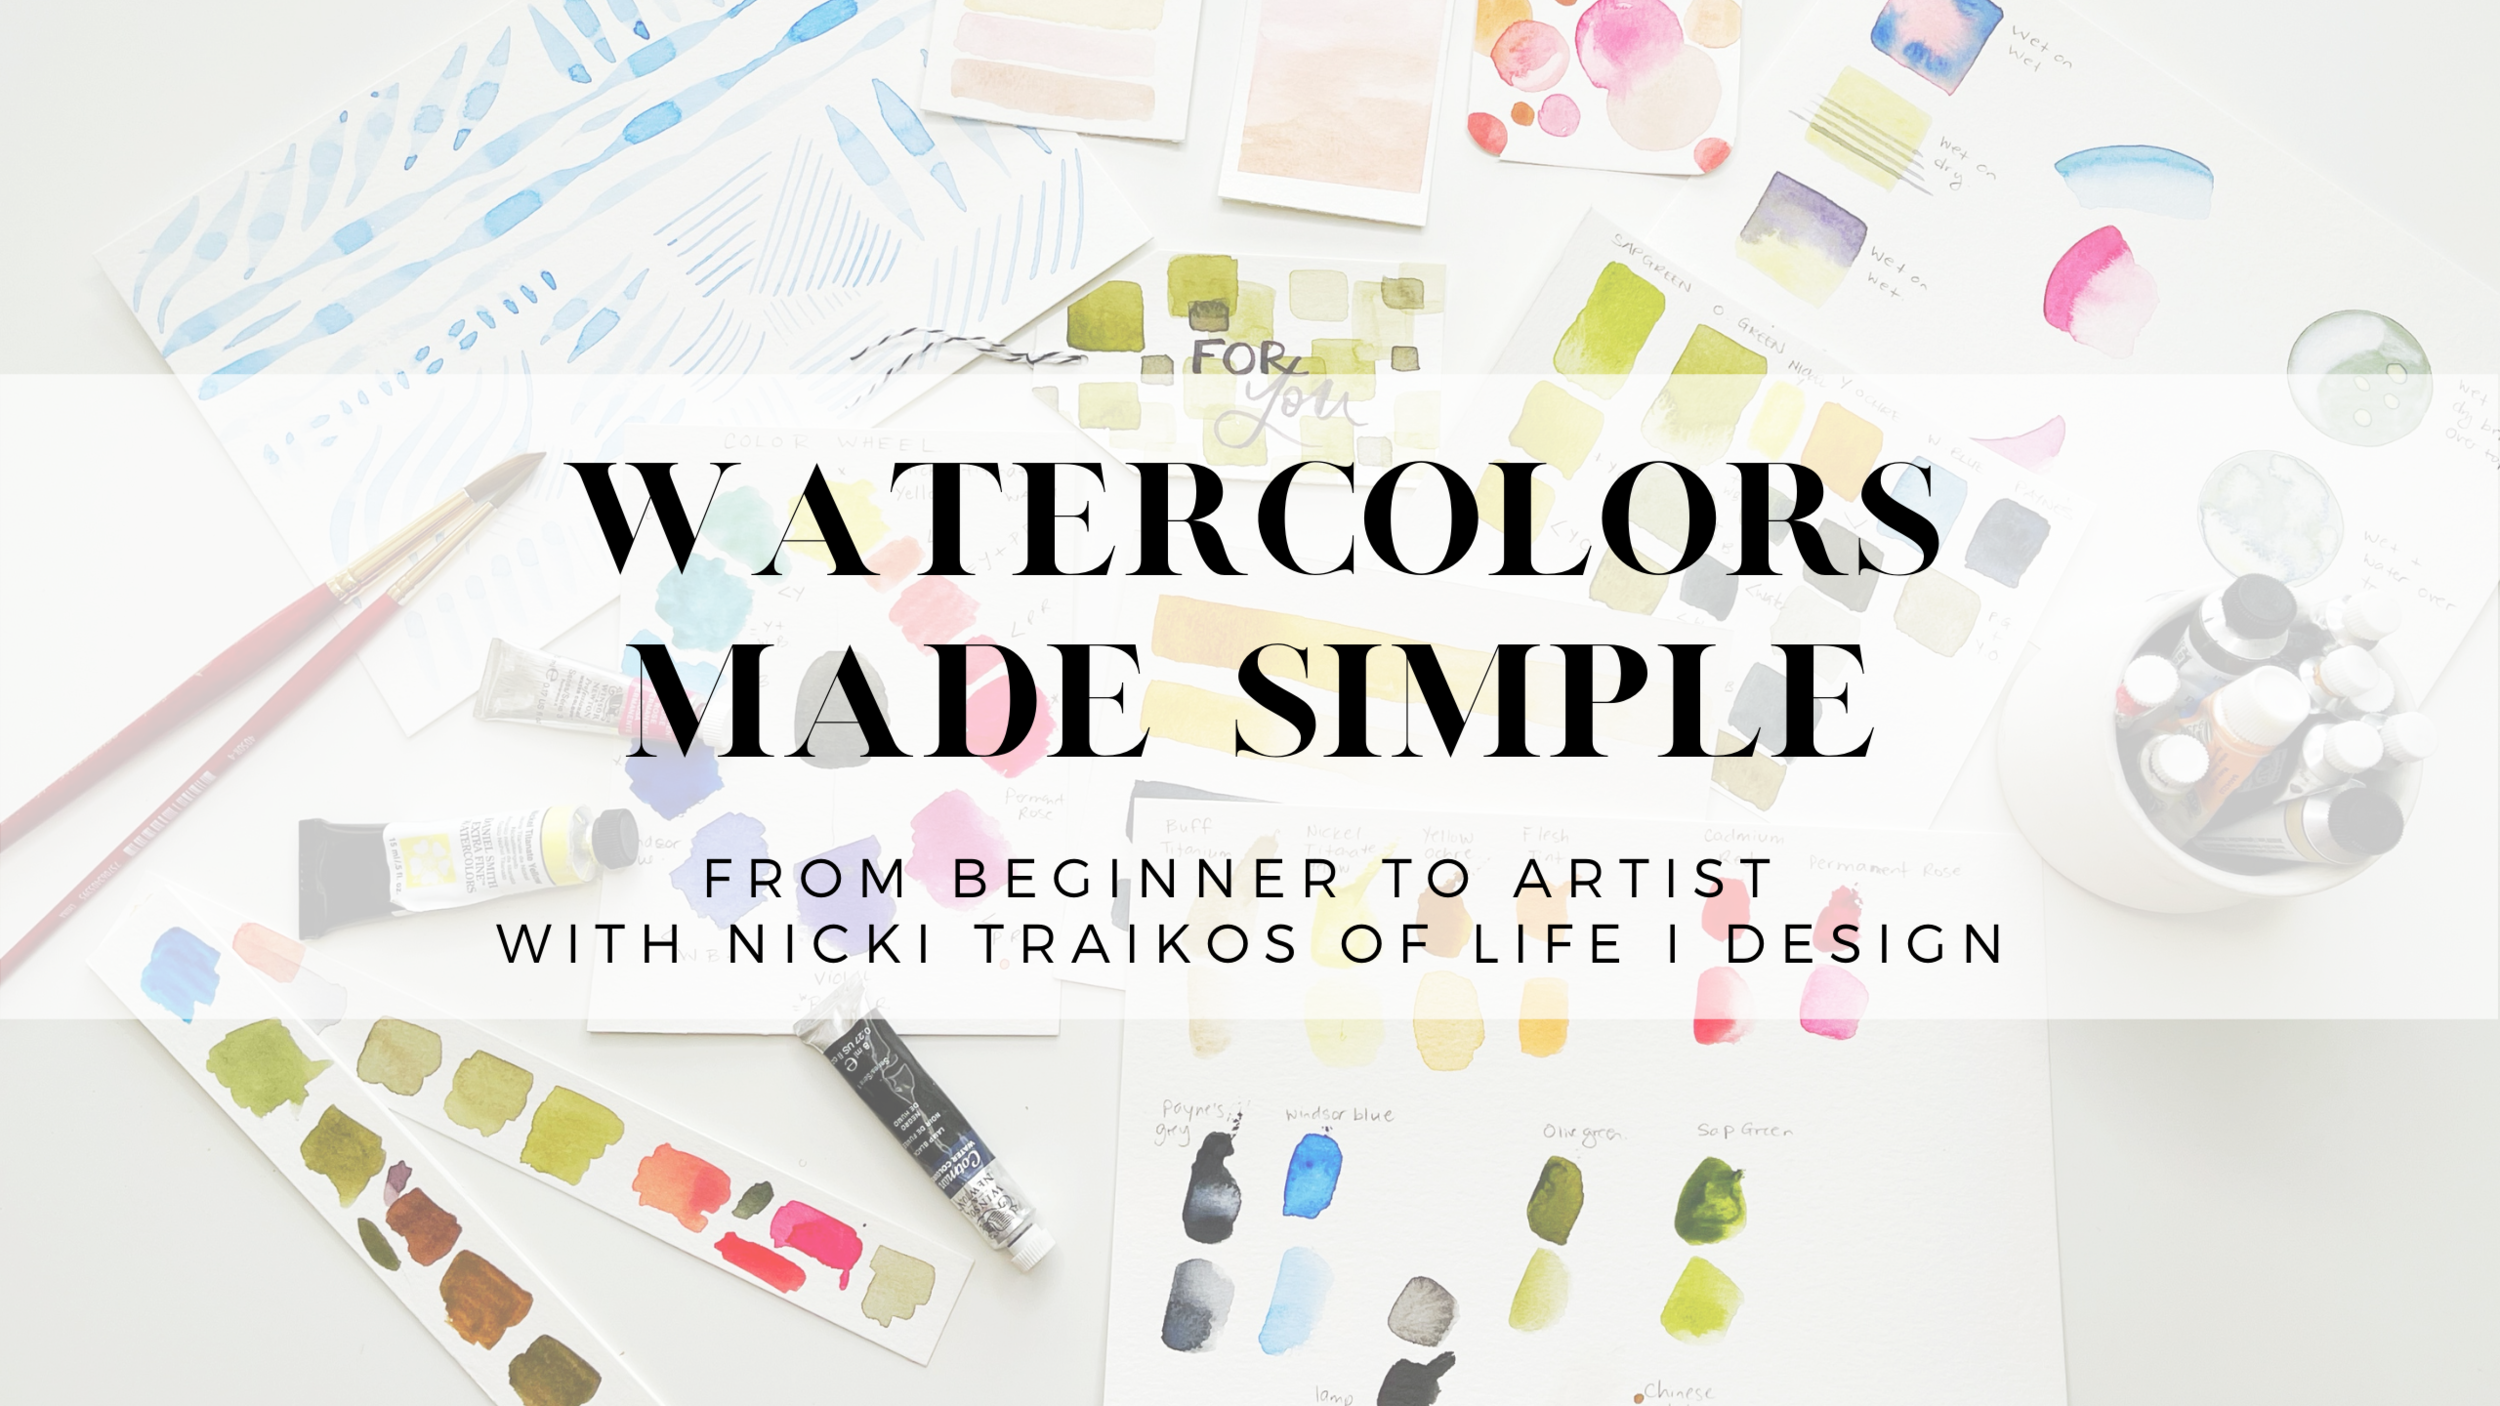 The Best Watercolors for Your Classroom - The Art Teacher's Lounge